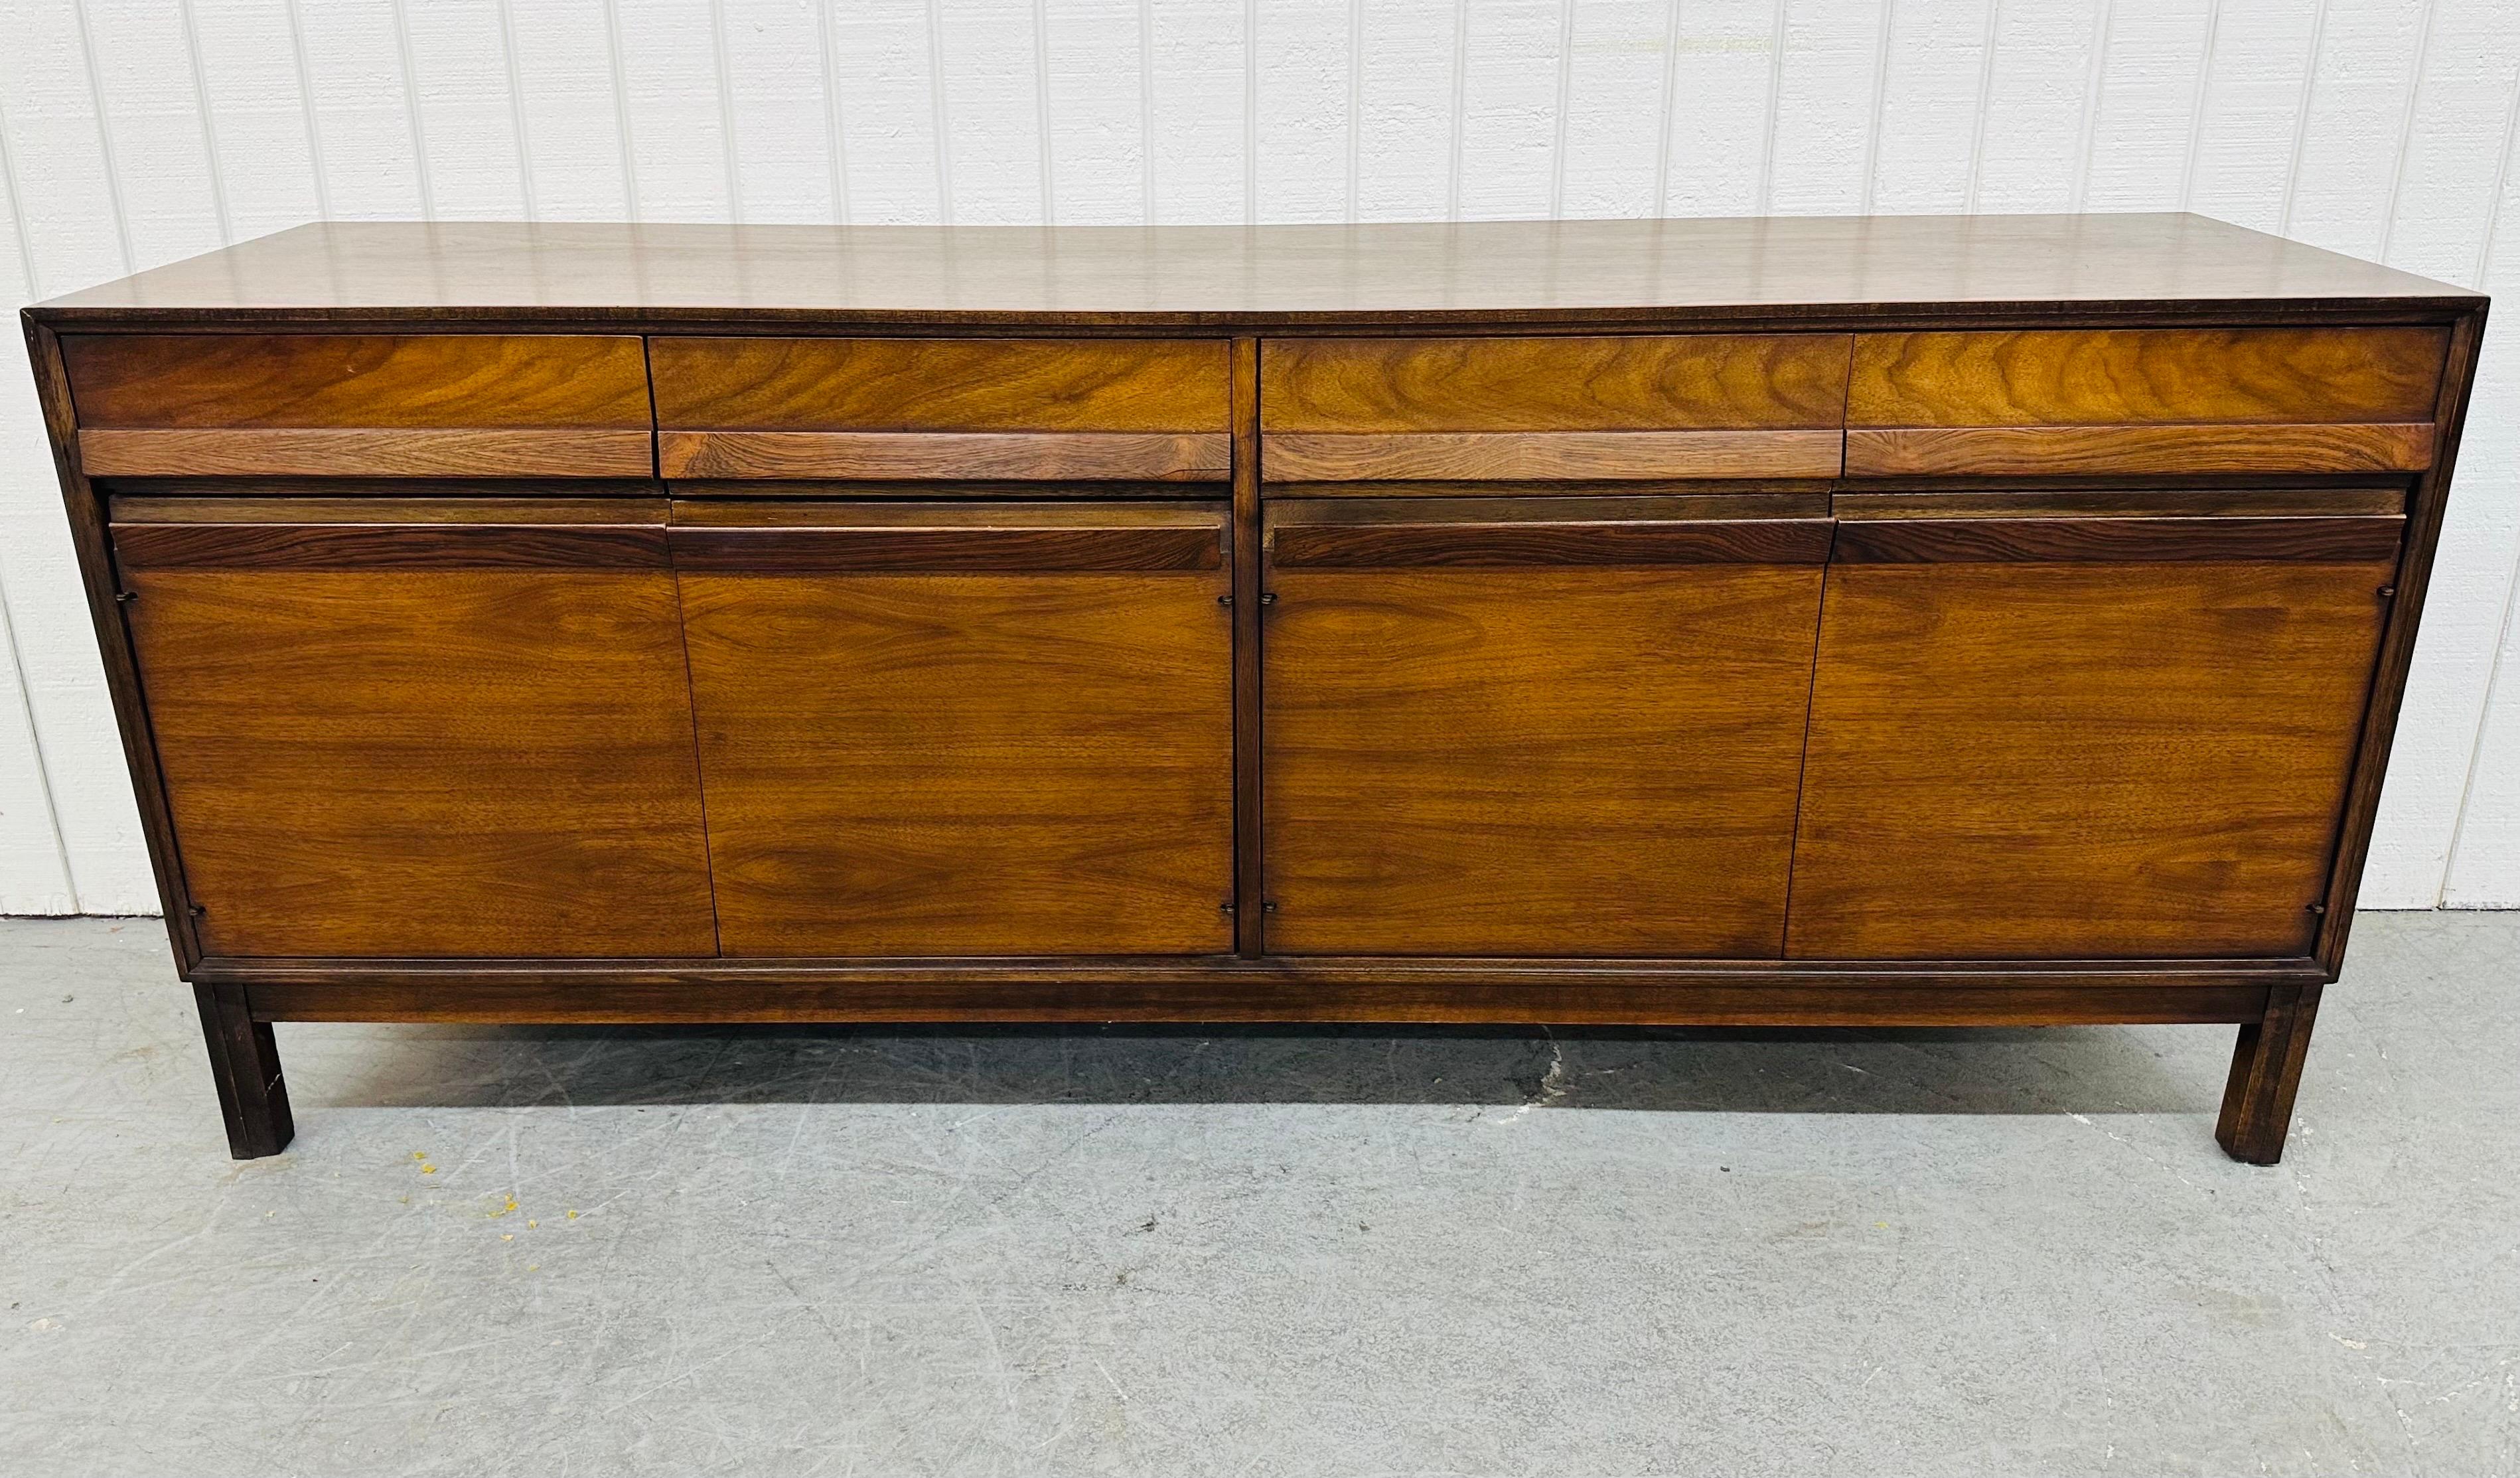 This listing is for a Mid-Century Modern American of Martinsville Walnut Sideboard. Featuring a straight line design, four small drawers with rosewood pulls along the top, two doors on the left with rosewood pulls that open up to storage space, two